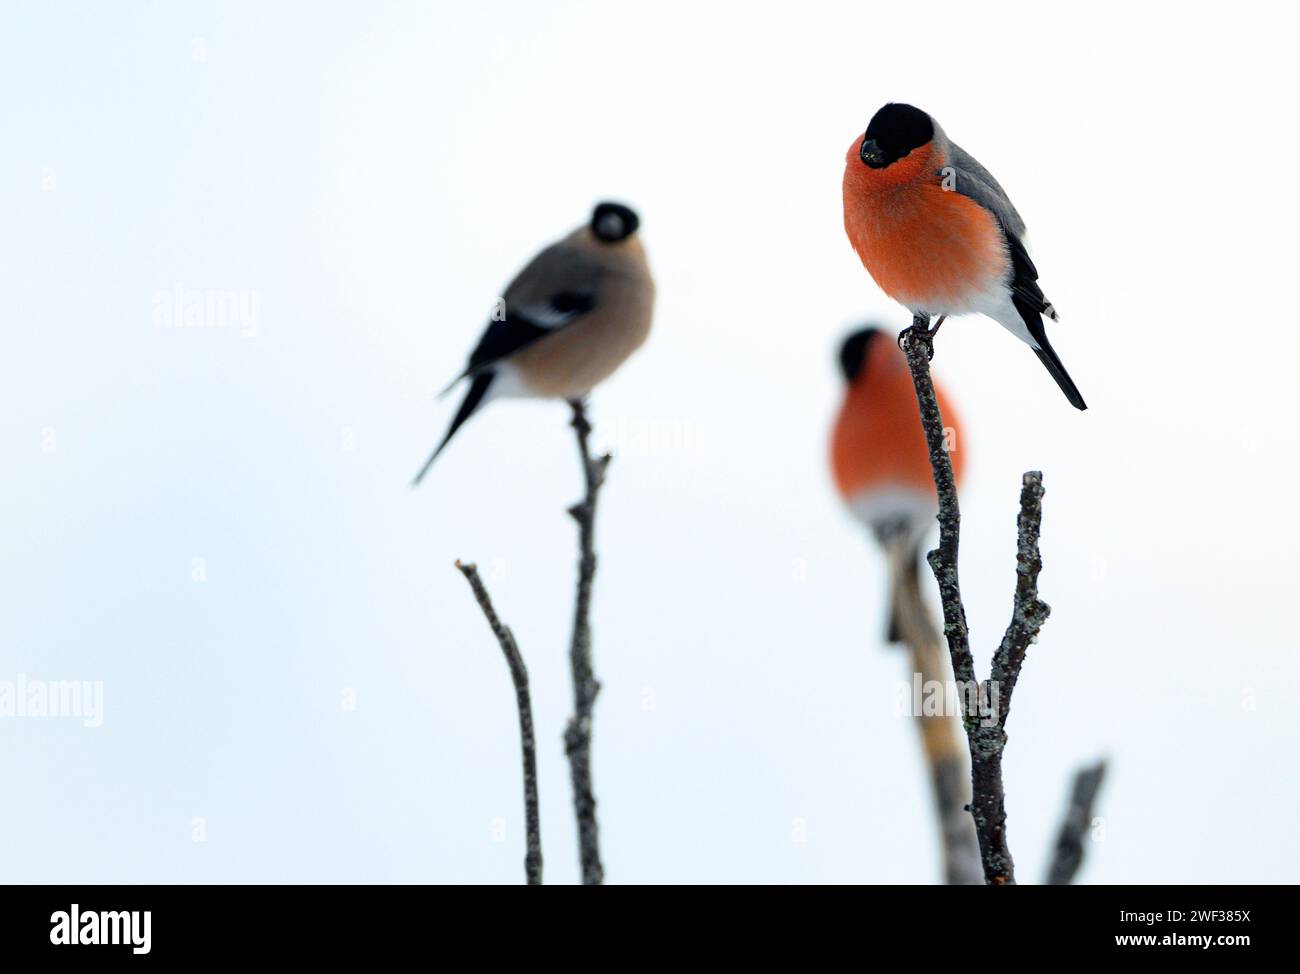 Male and female bullfinches (Pyrrhula pyrrhula) photographed in Telemark, southern Norway in January. Stock Photo